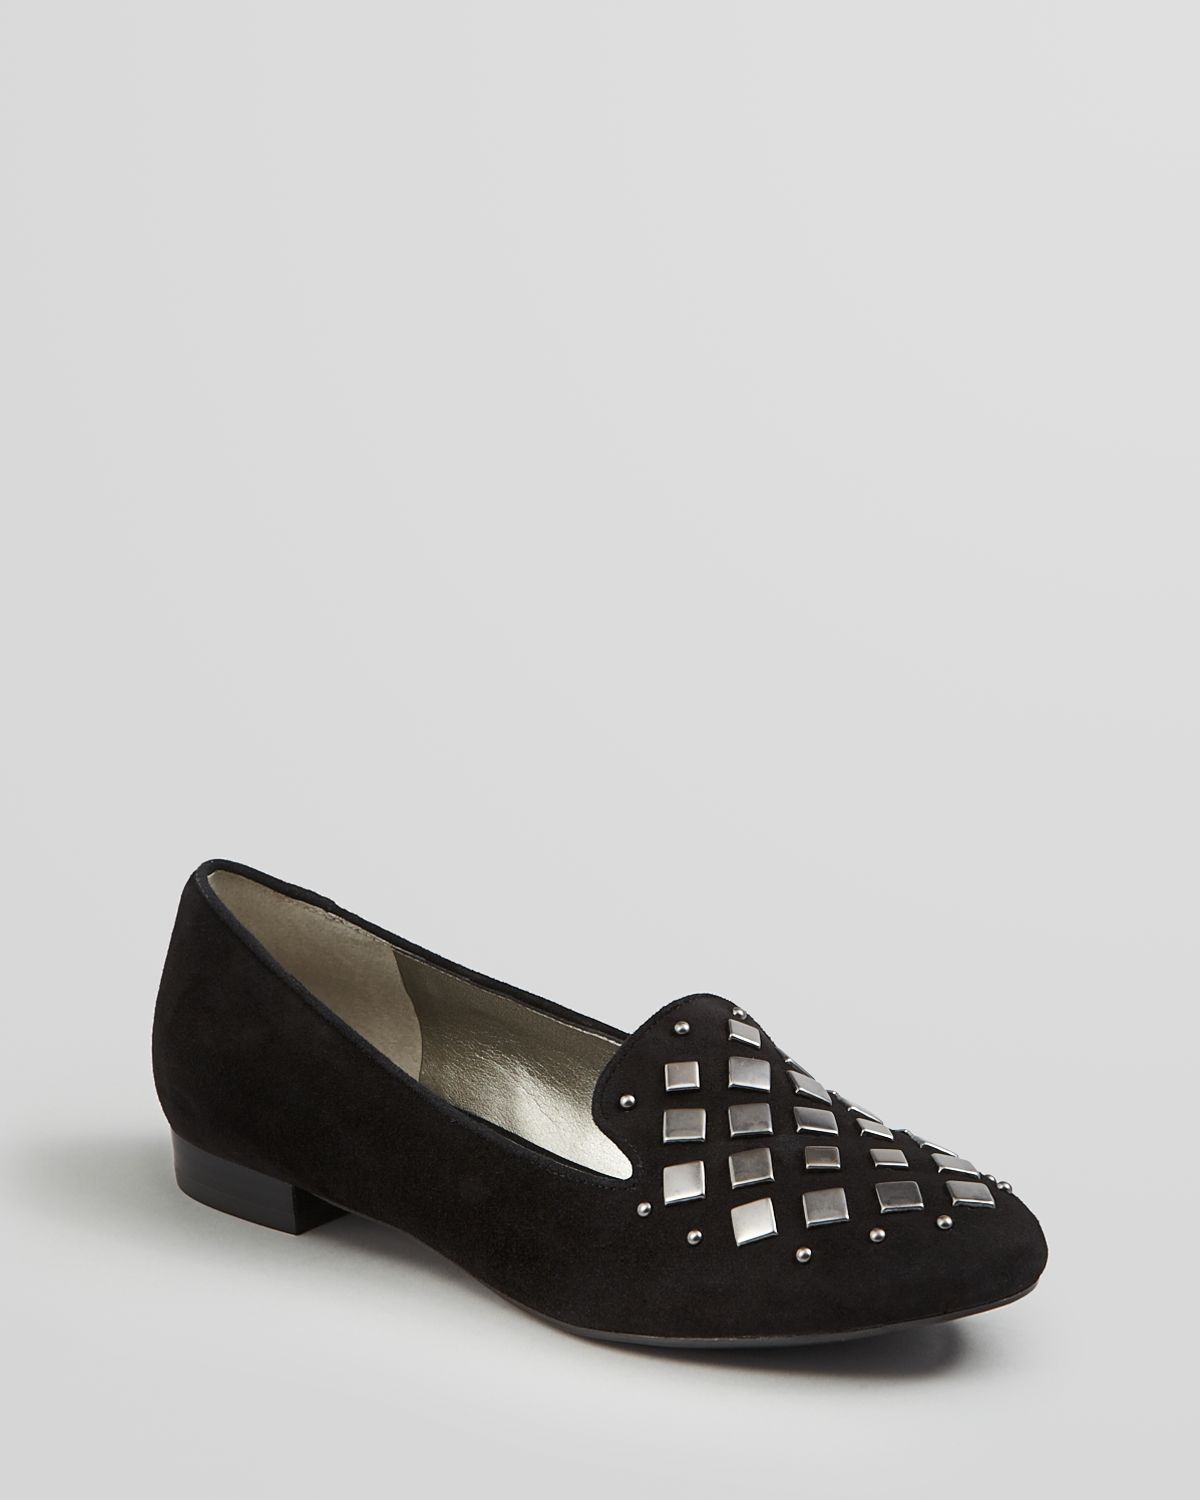 Lyst - Guess Smoking Flats Sablette Studded in Gray